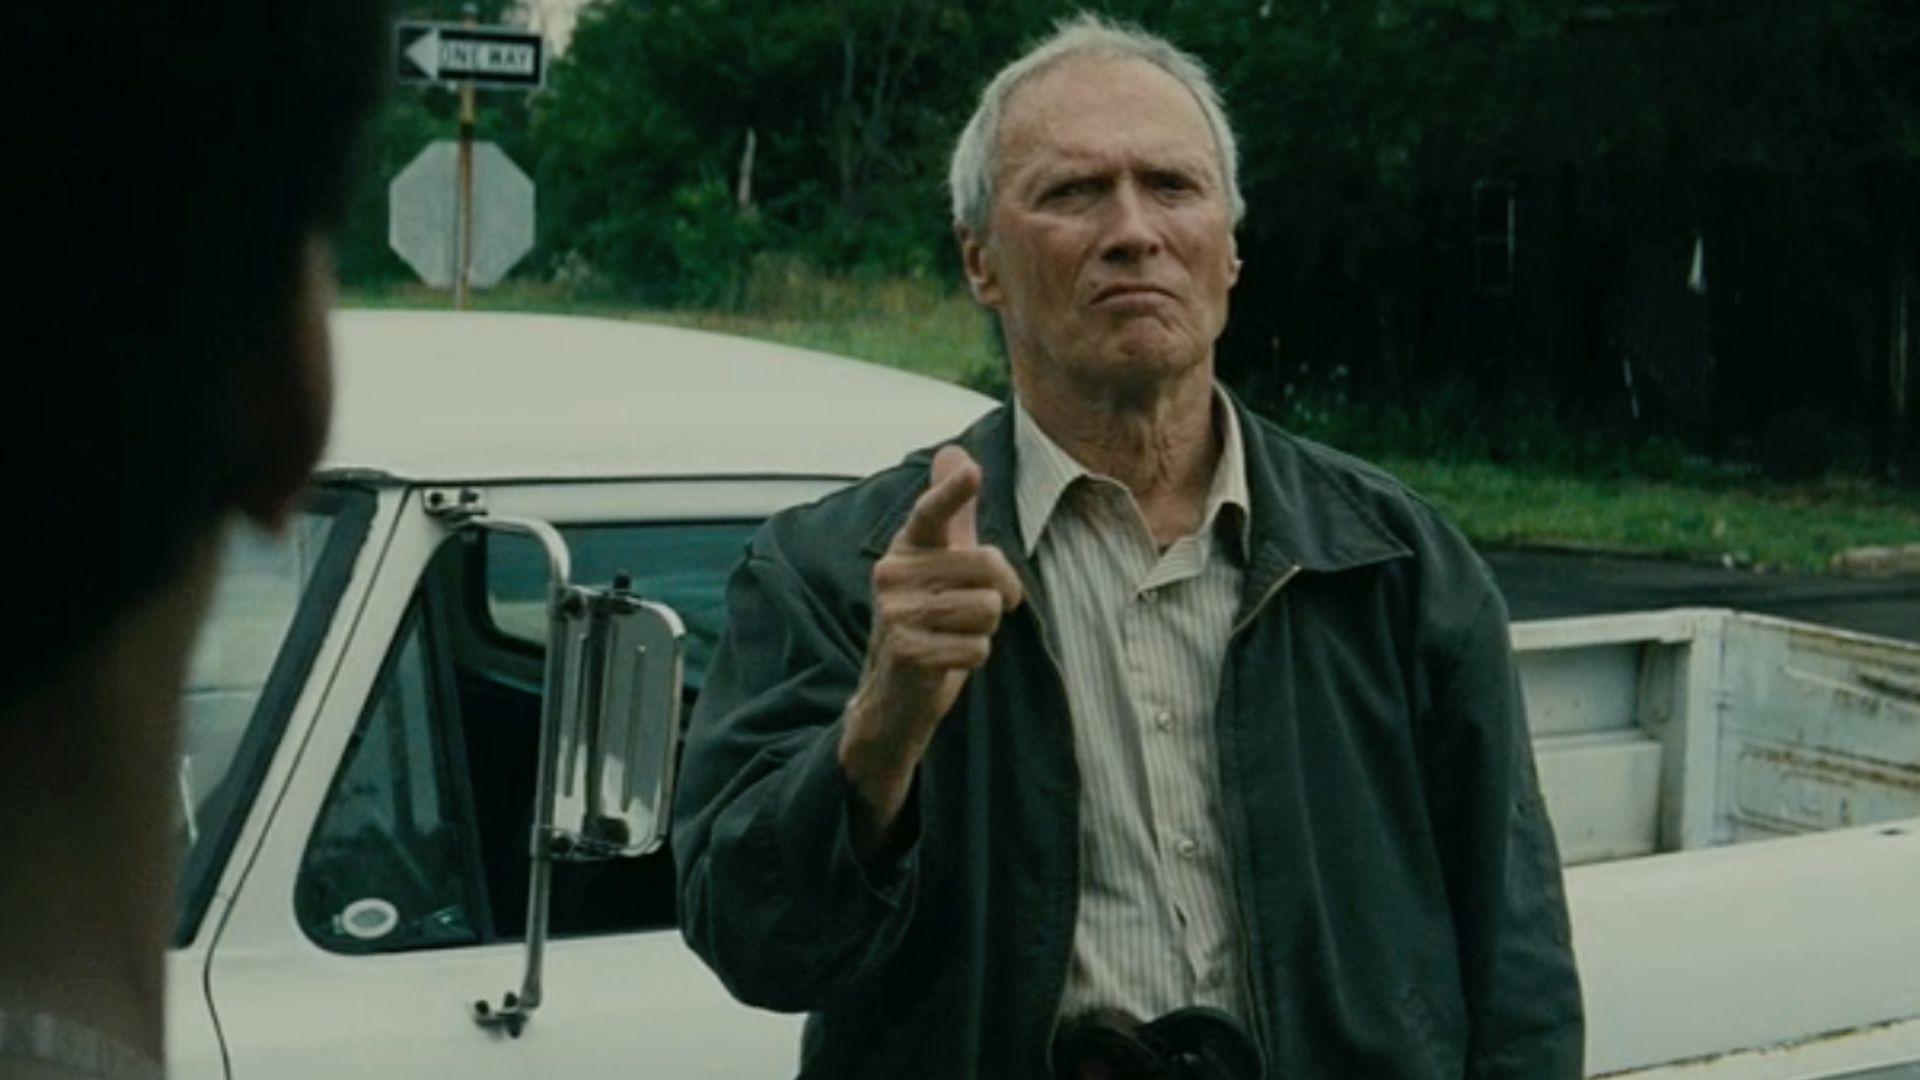 Clint Eastwood's Next Film Could Tell The True Story Of A 90 Year